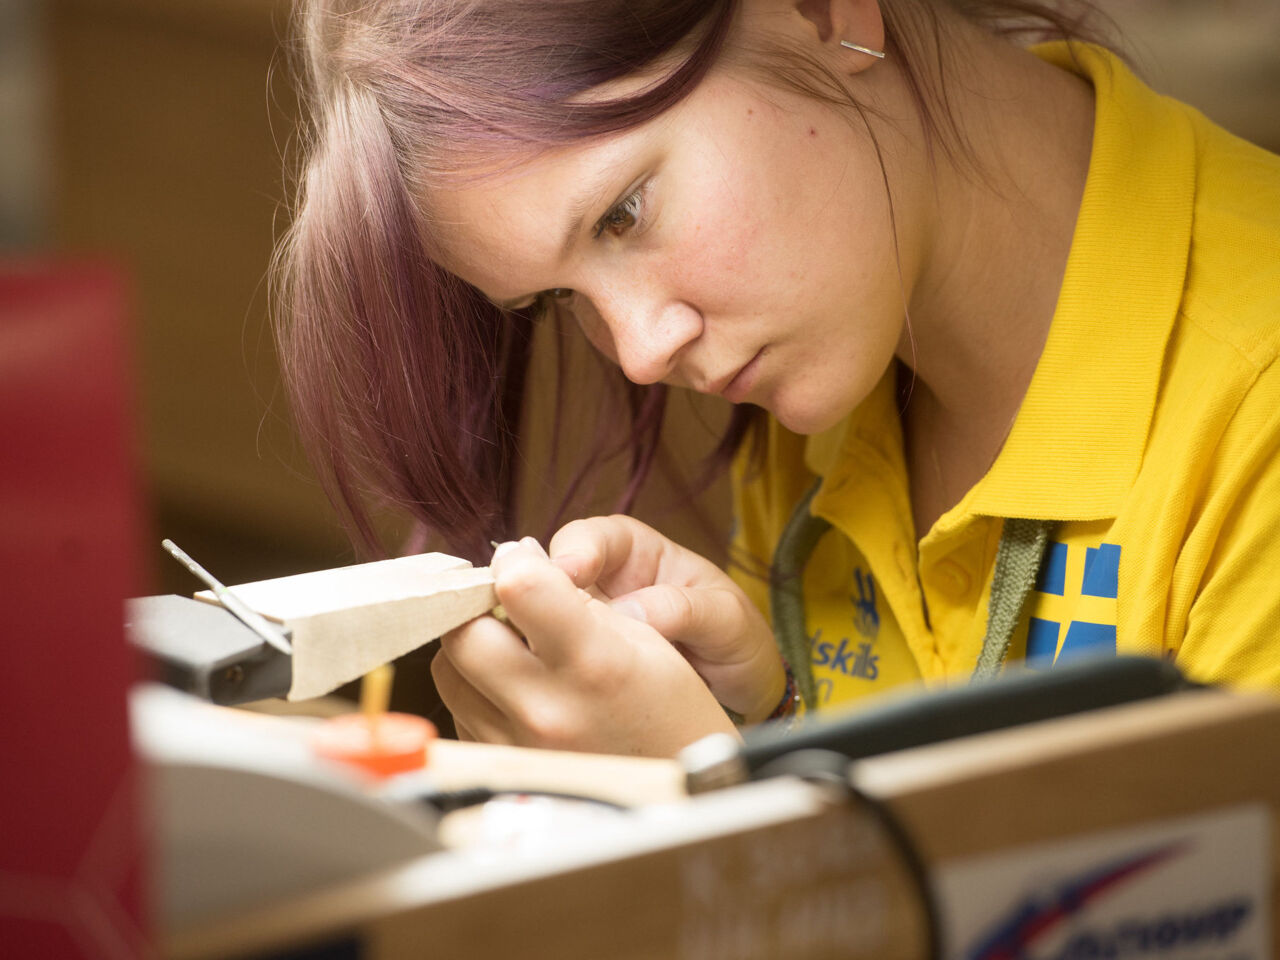 A jewellery competitor from Sweden at WorldSkills Kazan 2019.